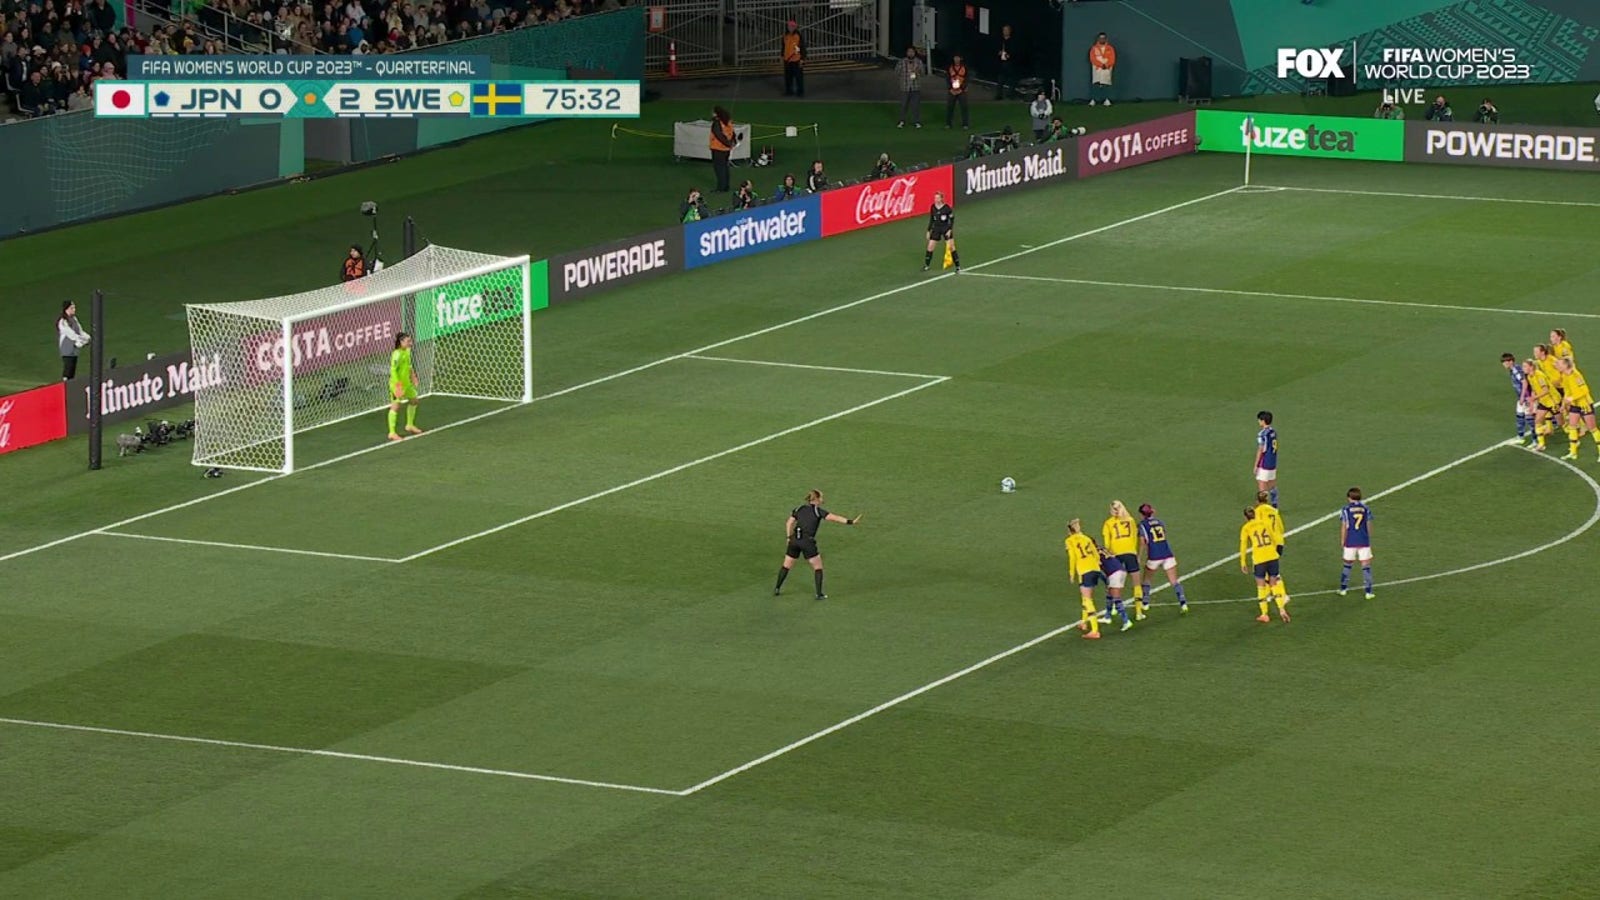 Japanese Reiko Yueki misses a penalty against Sweden in the 76th minute